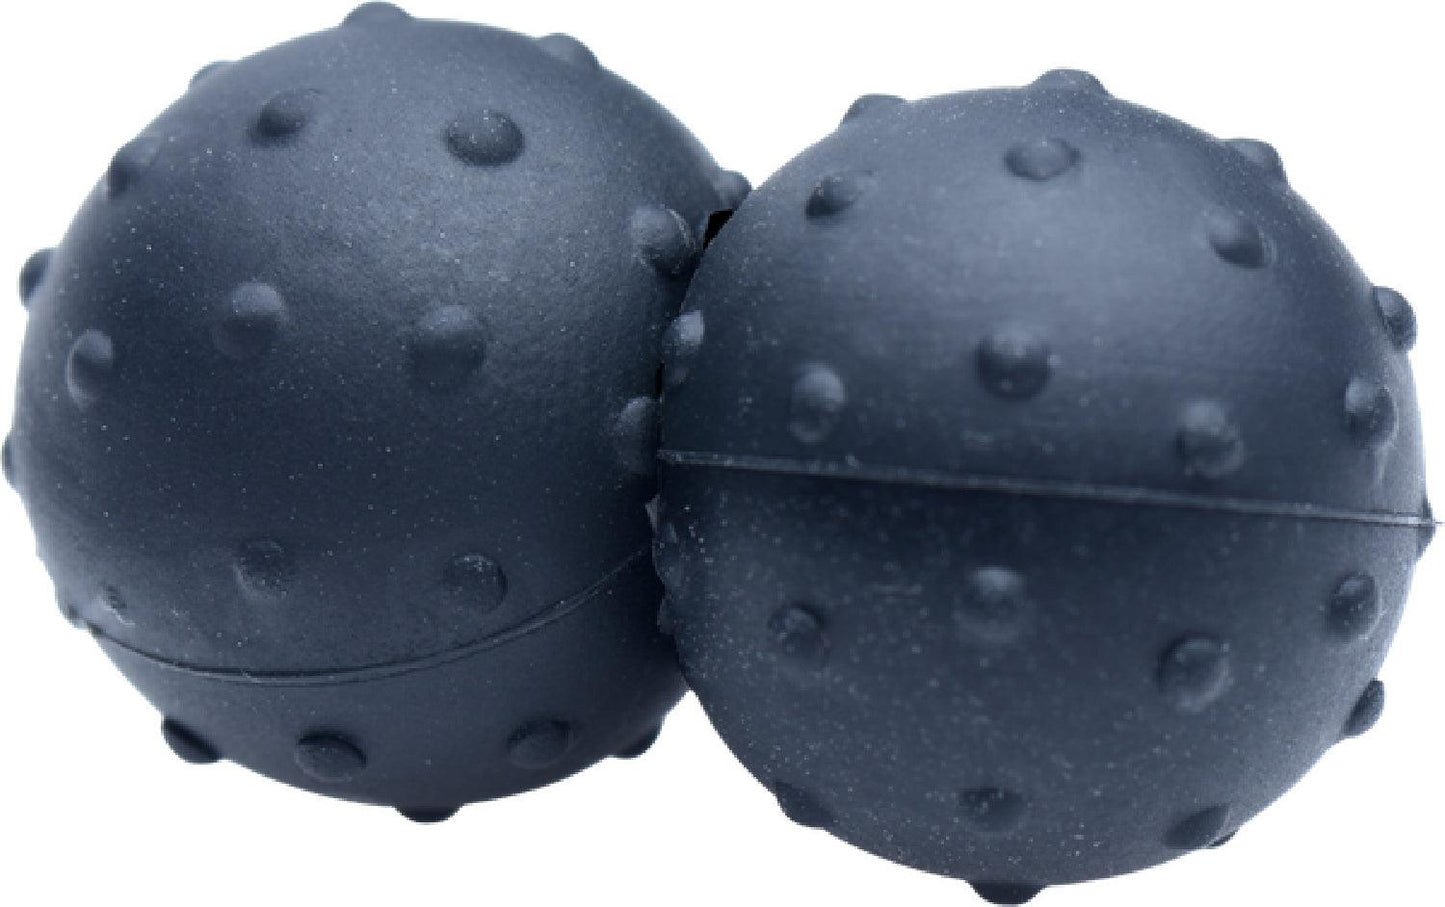 Dragon's Orbs Nubbed Silicone Magnetic Balls - Take A Peek